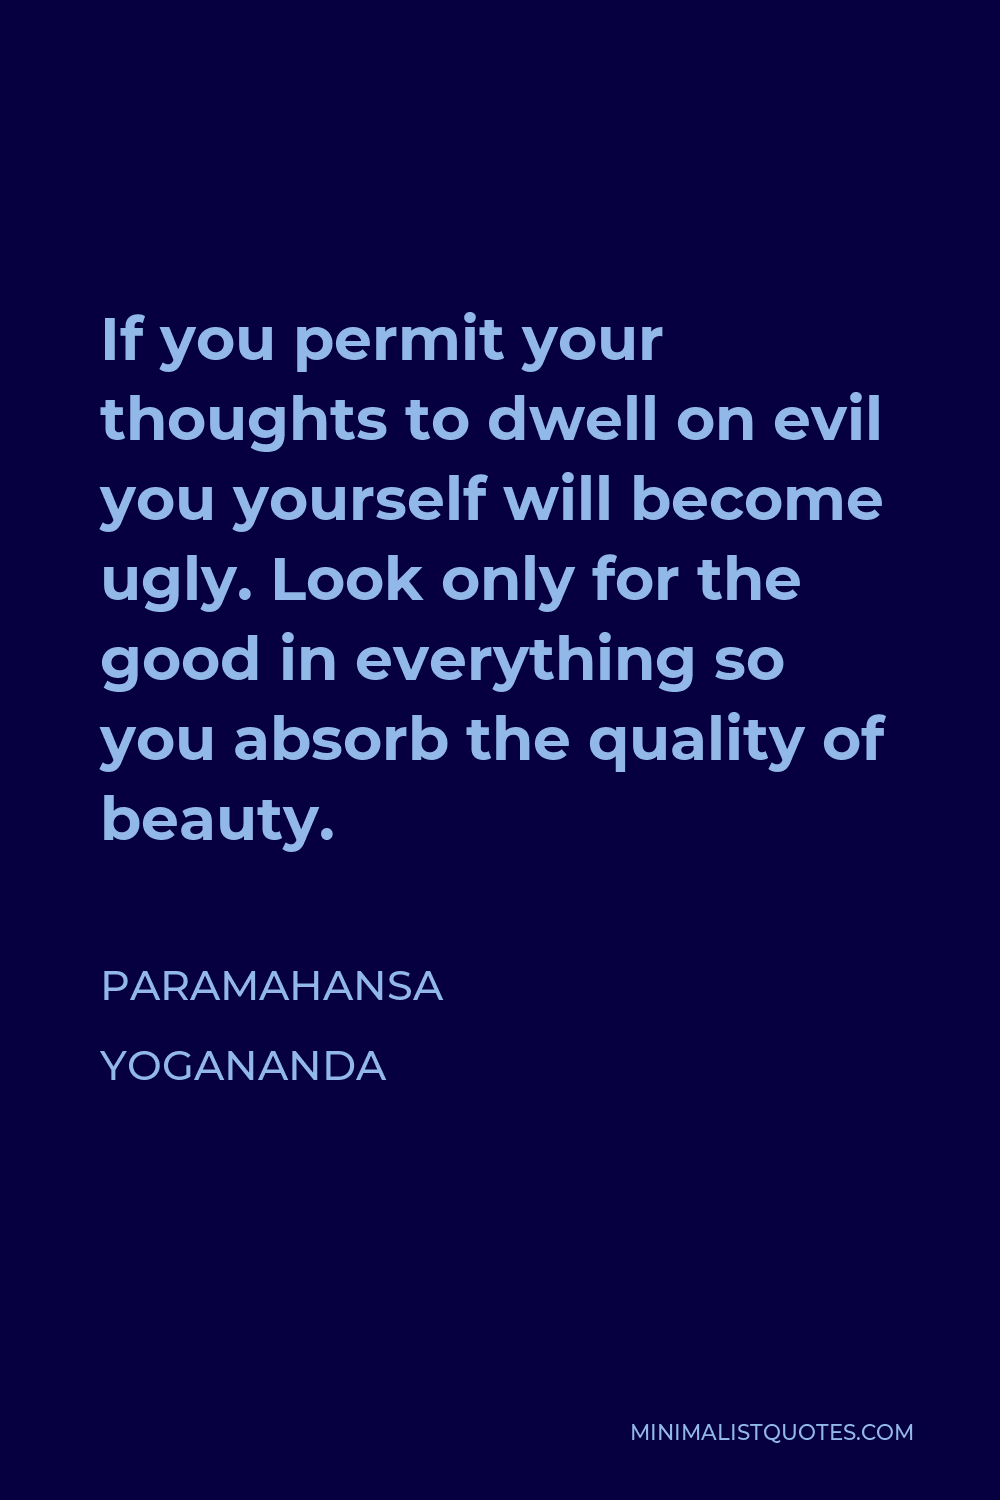 Paramahansa Yogananda Quote - If you permit your thoughts to dwell on evil you yourself will become ugly. Look only for the good in everything so you absorb the quality of beauty.